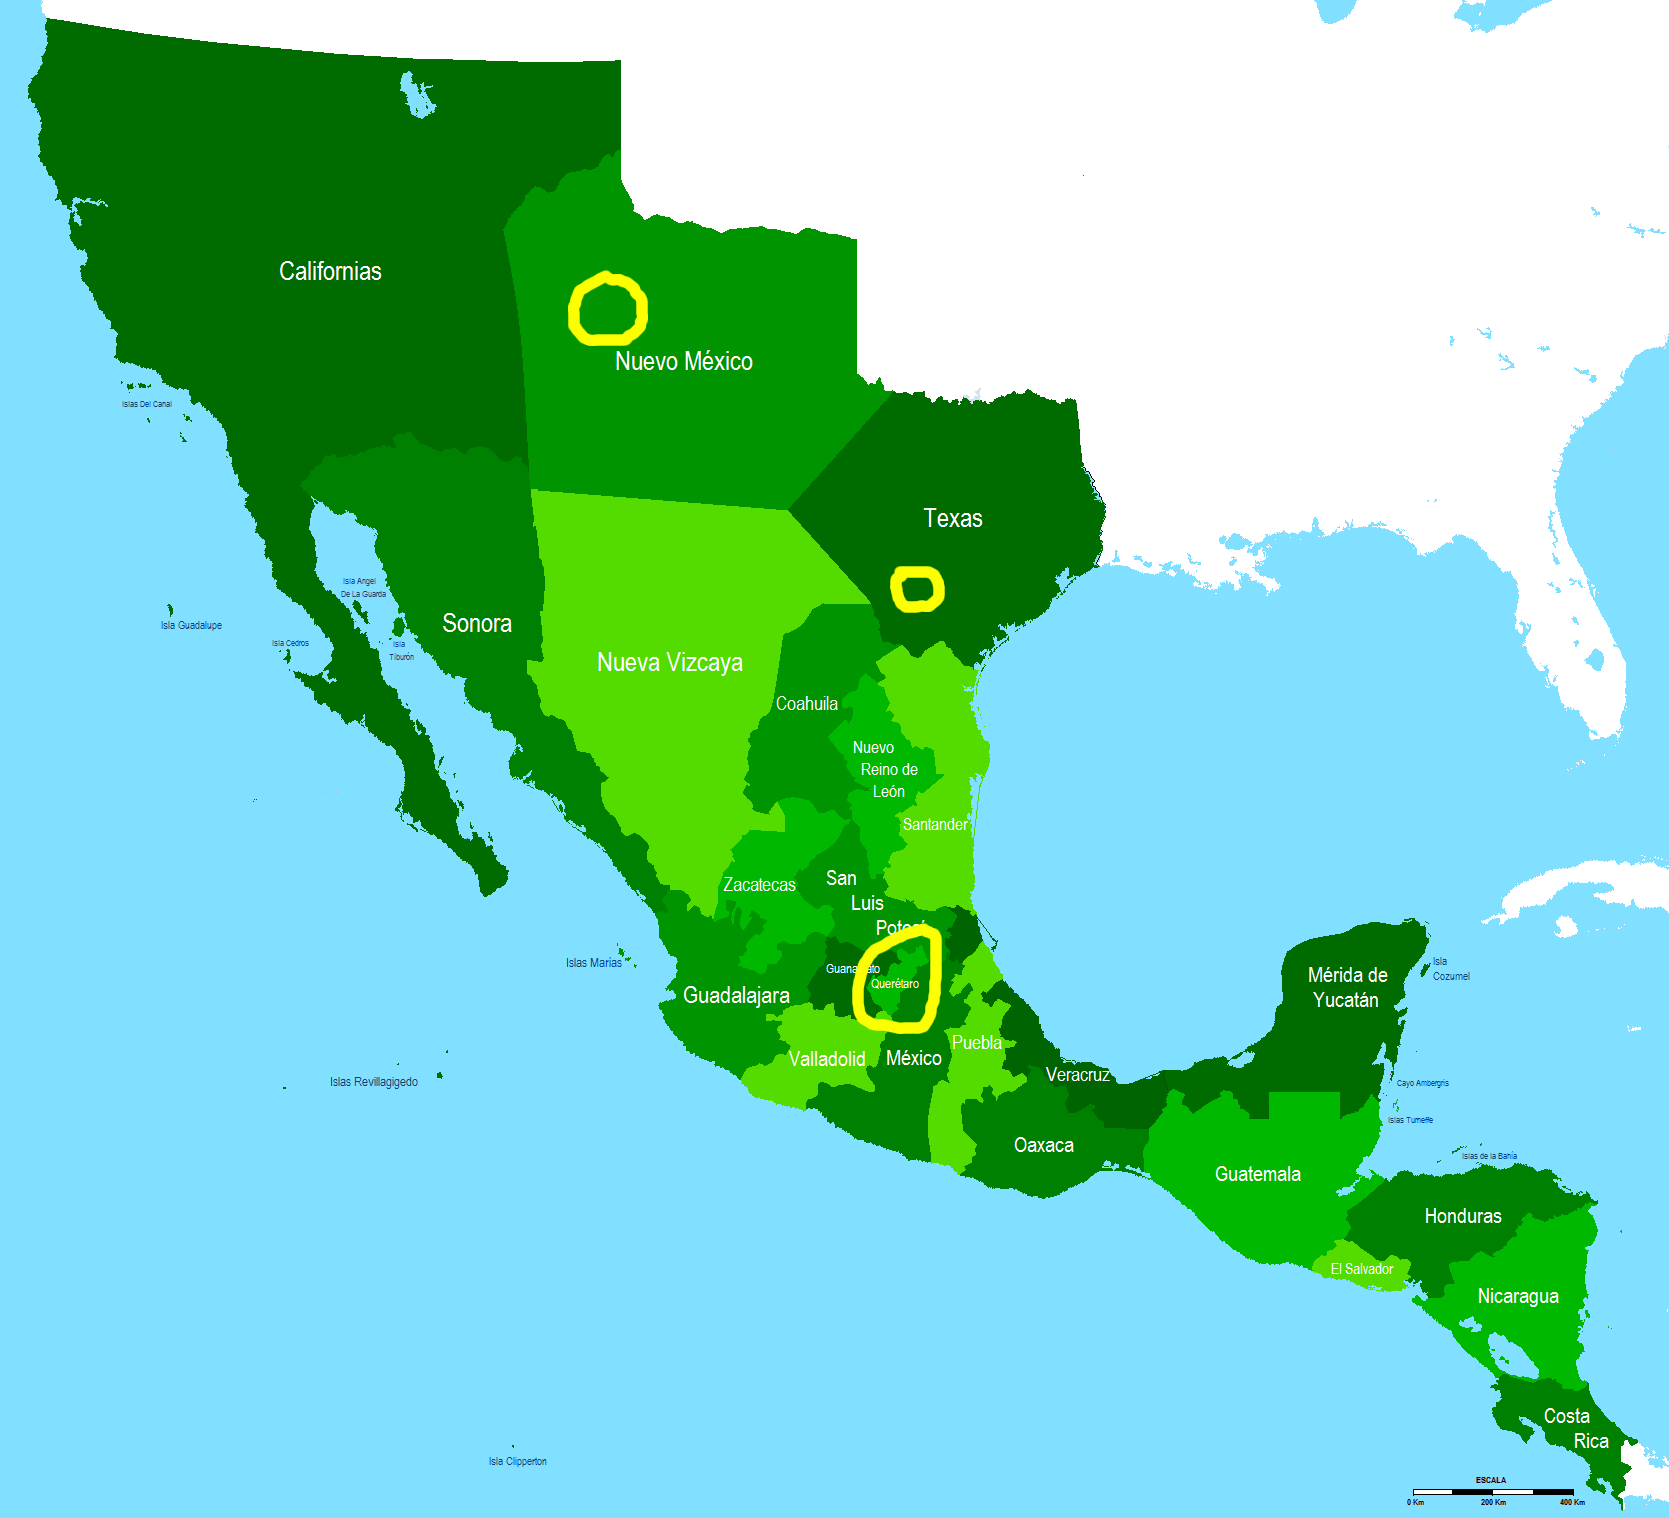 Map of Mexico in 1821, with gorditas